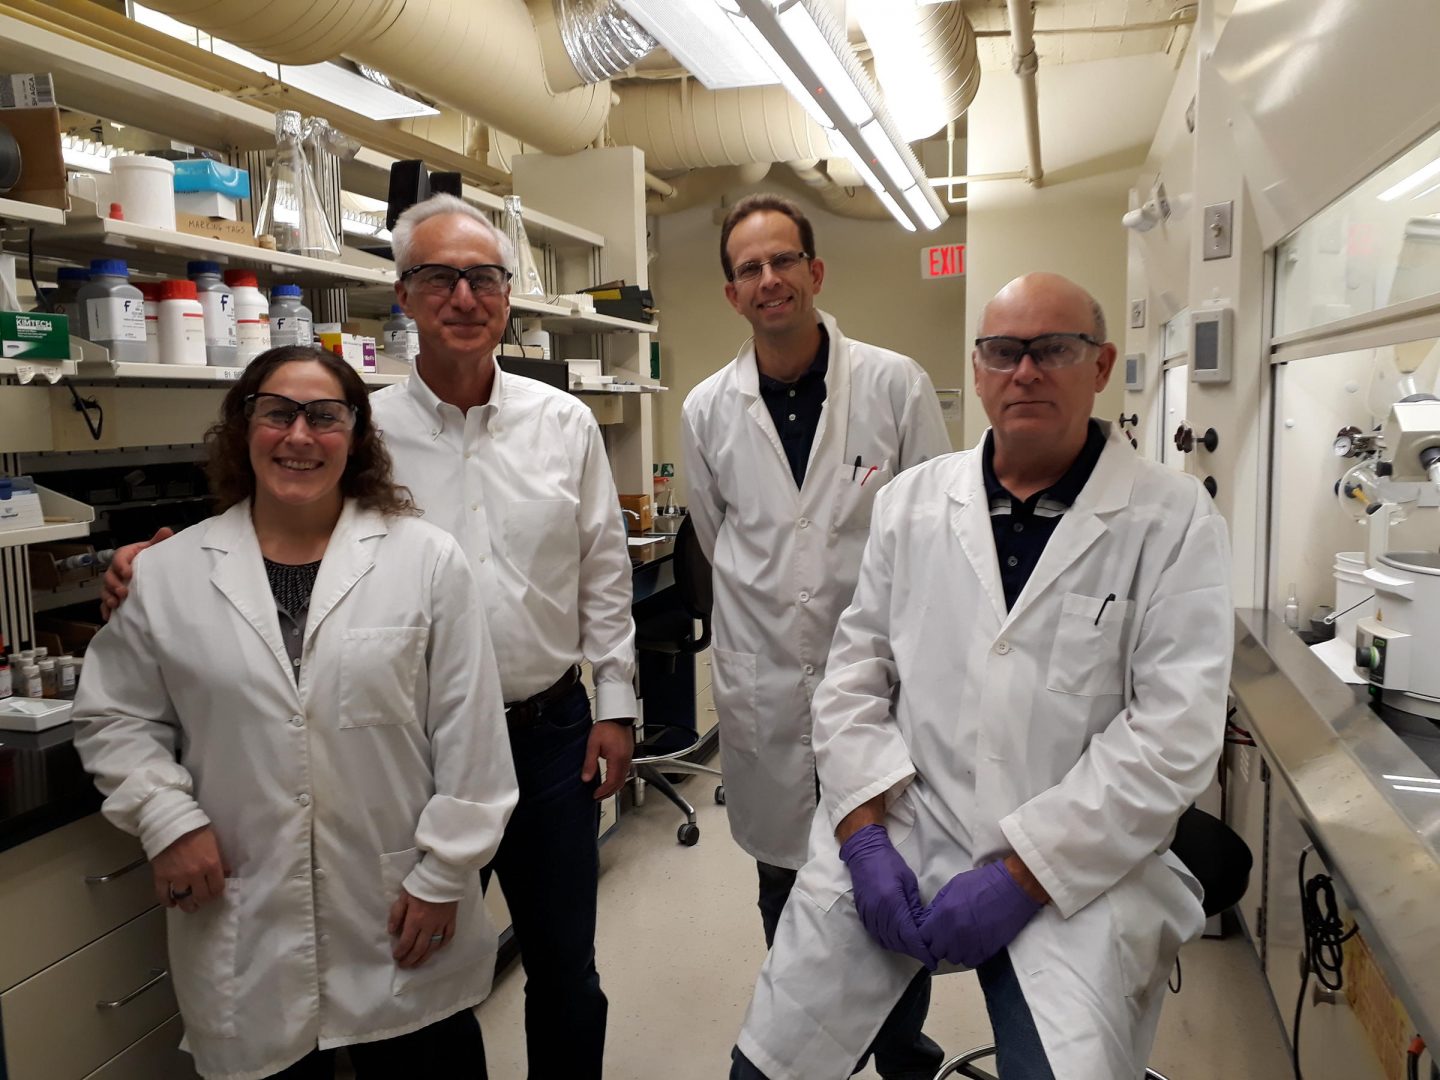 Knopp CEO Mike Bozik (second from left) stands in the Knopp lab with scientists Kelly Picchione (left,) Dave Mareska (second from right) and Chuck Flentge.